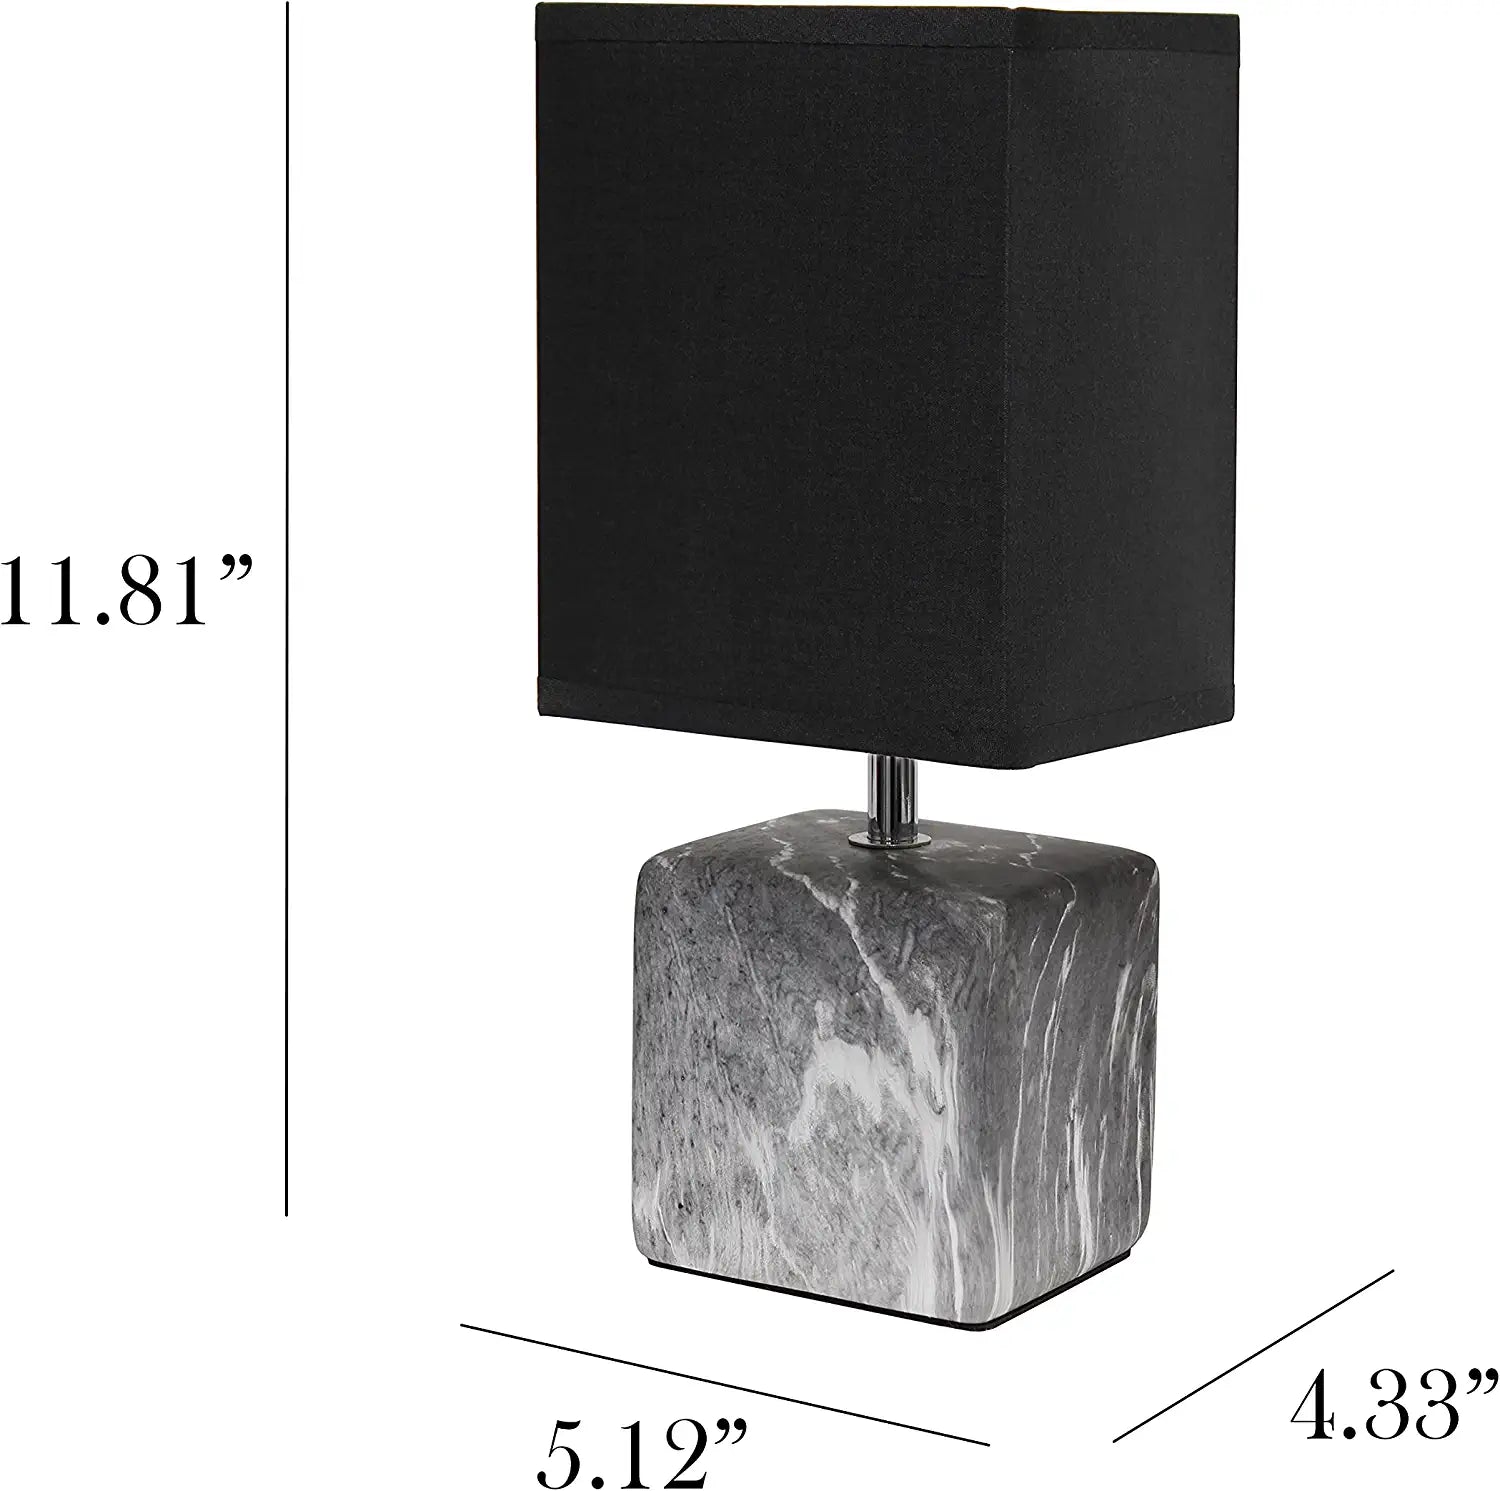 Simple Designs LT2071-BOB Mini Petite Gray White Marbled Ceramic Bedside Table Lamp with Black Shade